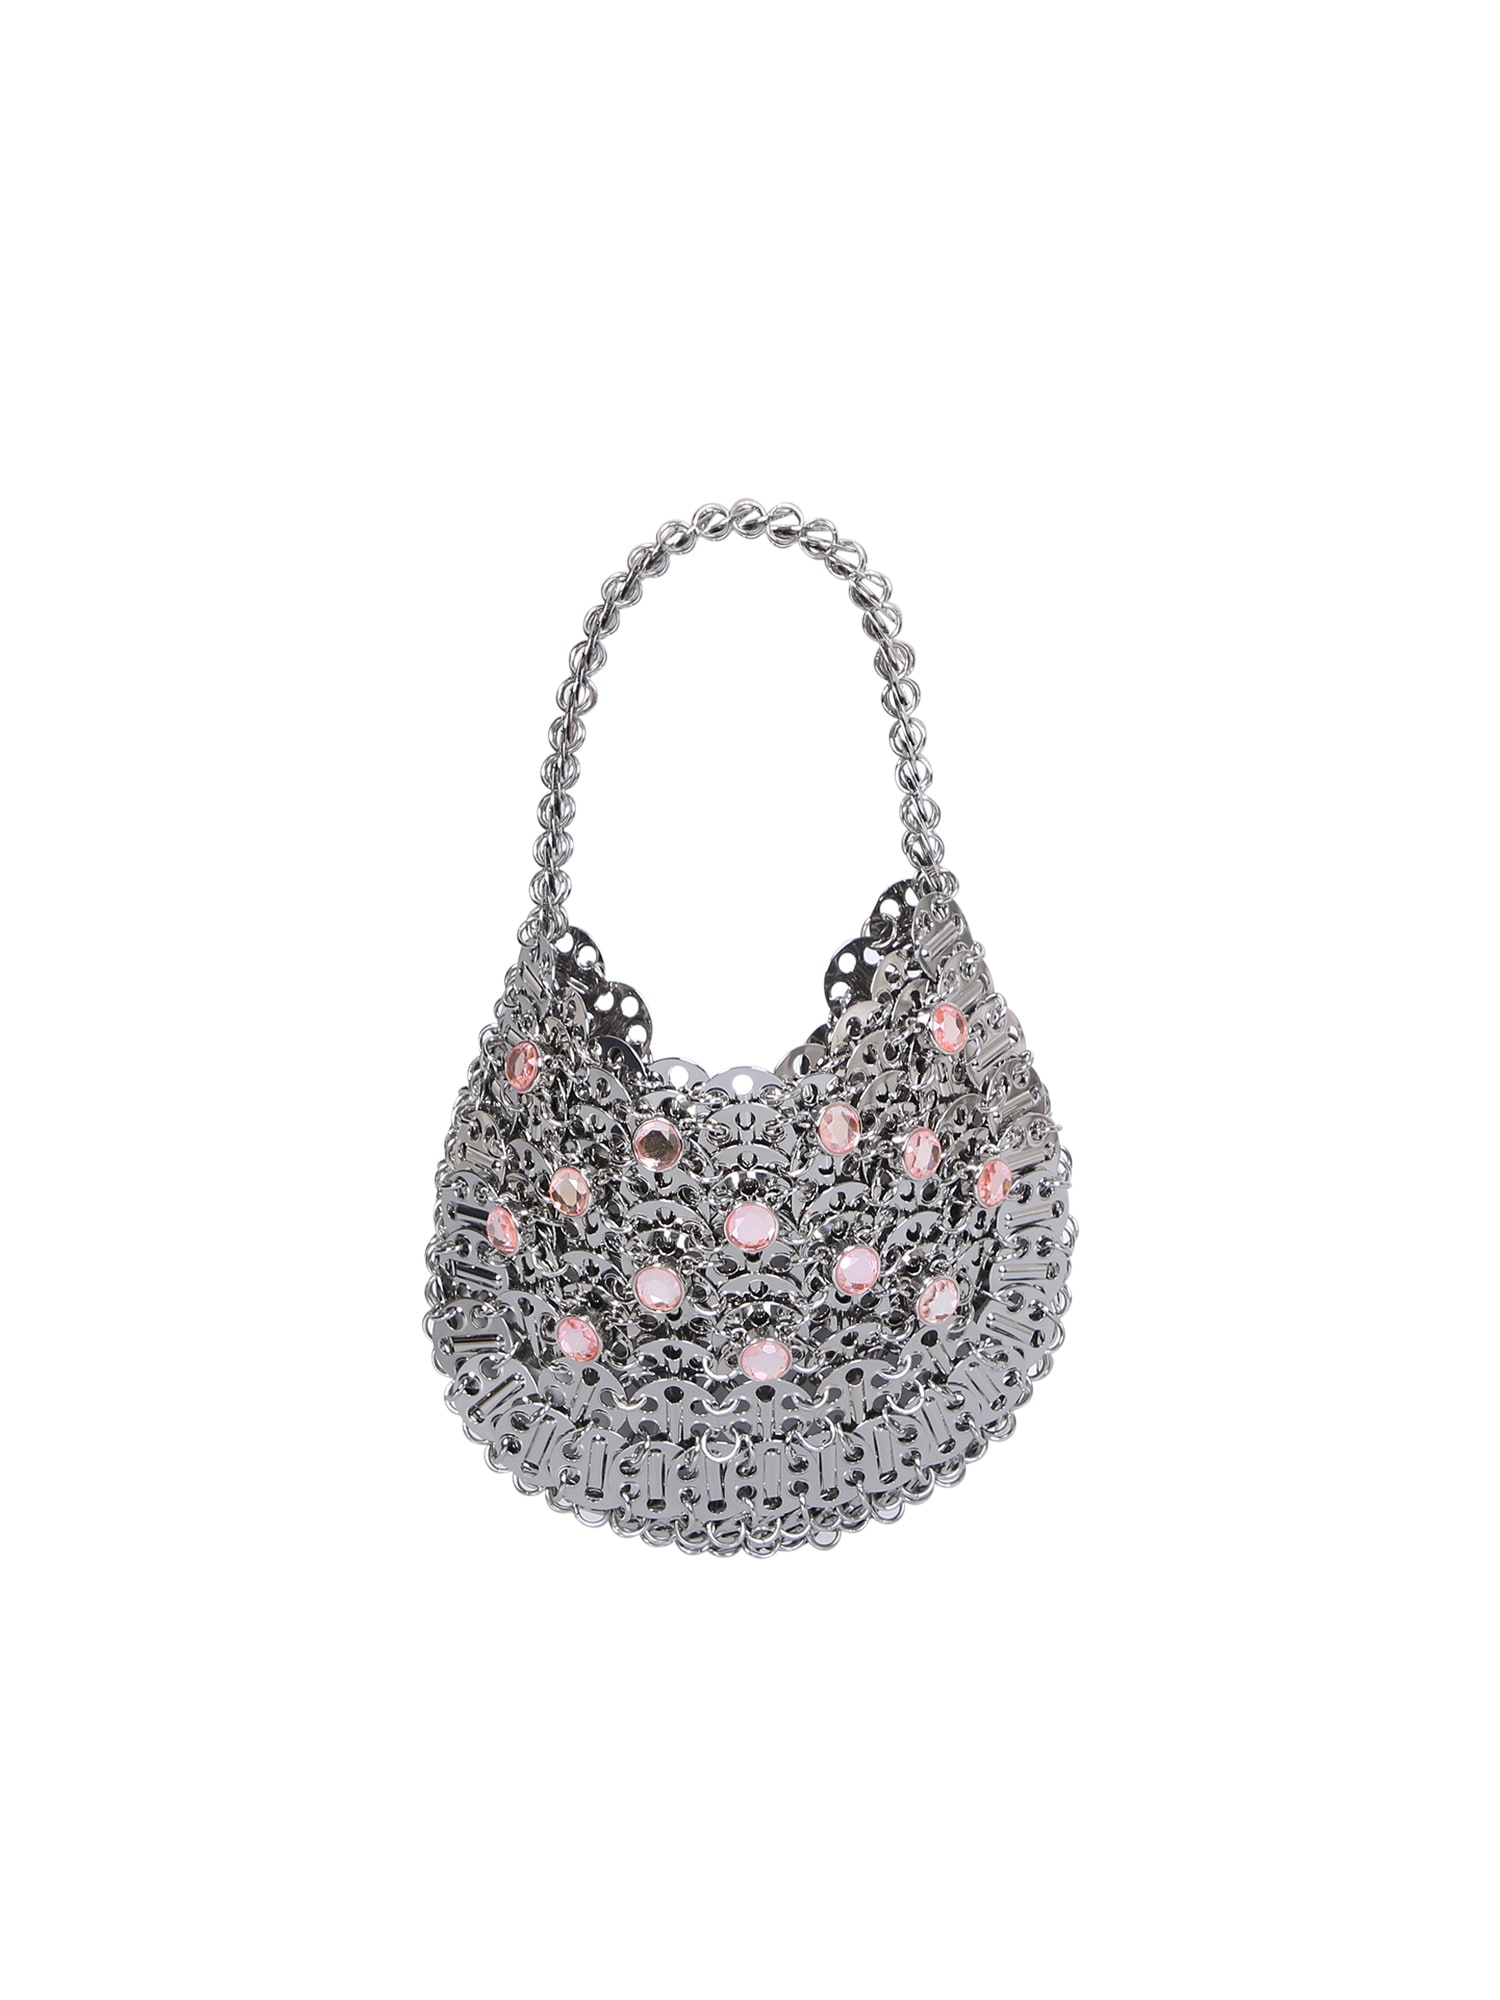 PACO RABANNE 1969 SMALL MOON BAG STRASS